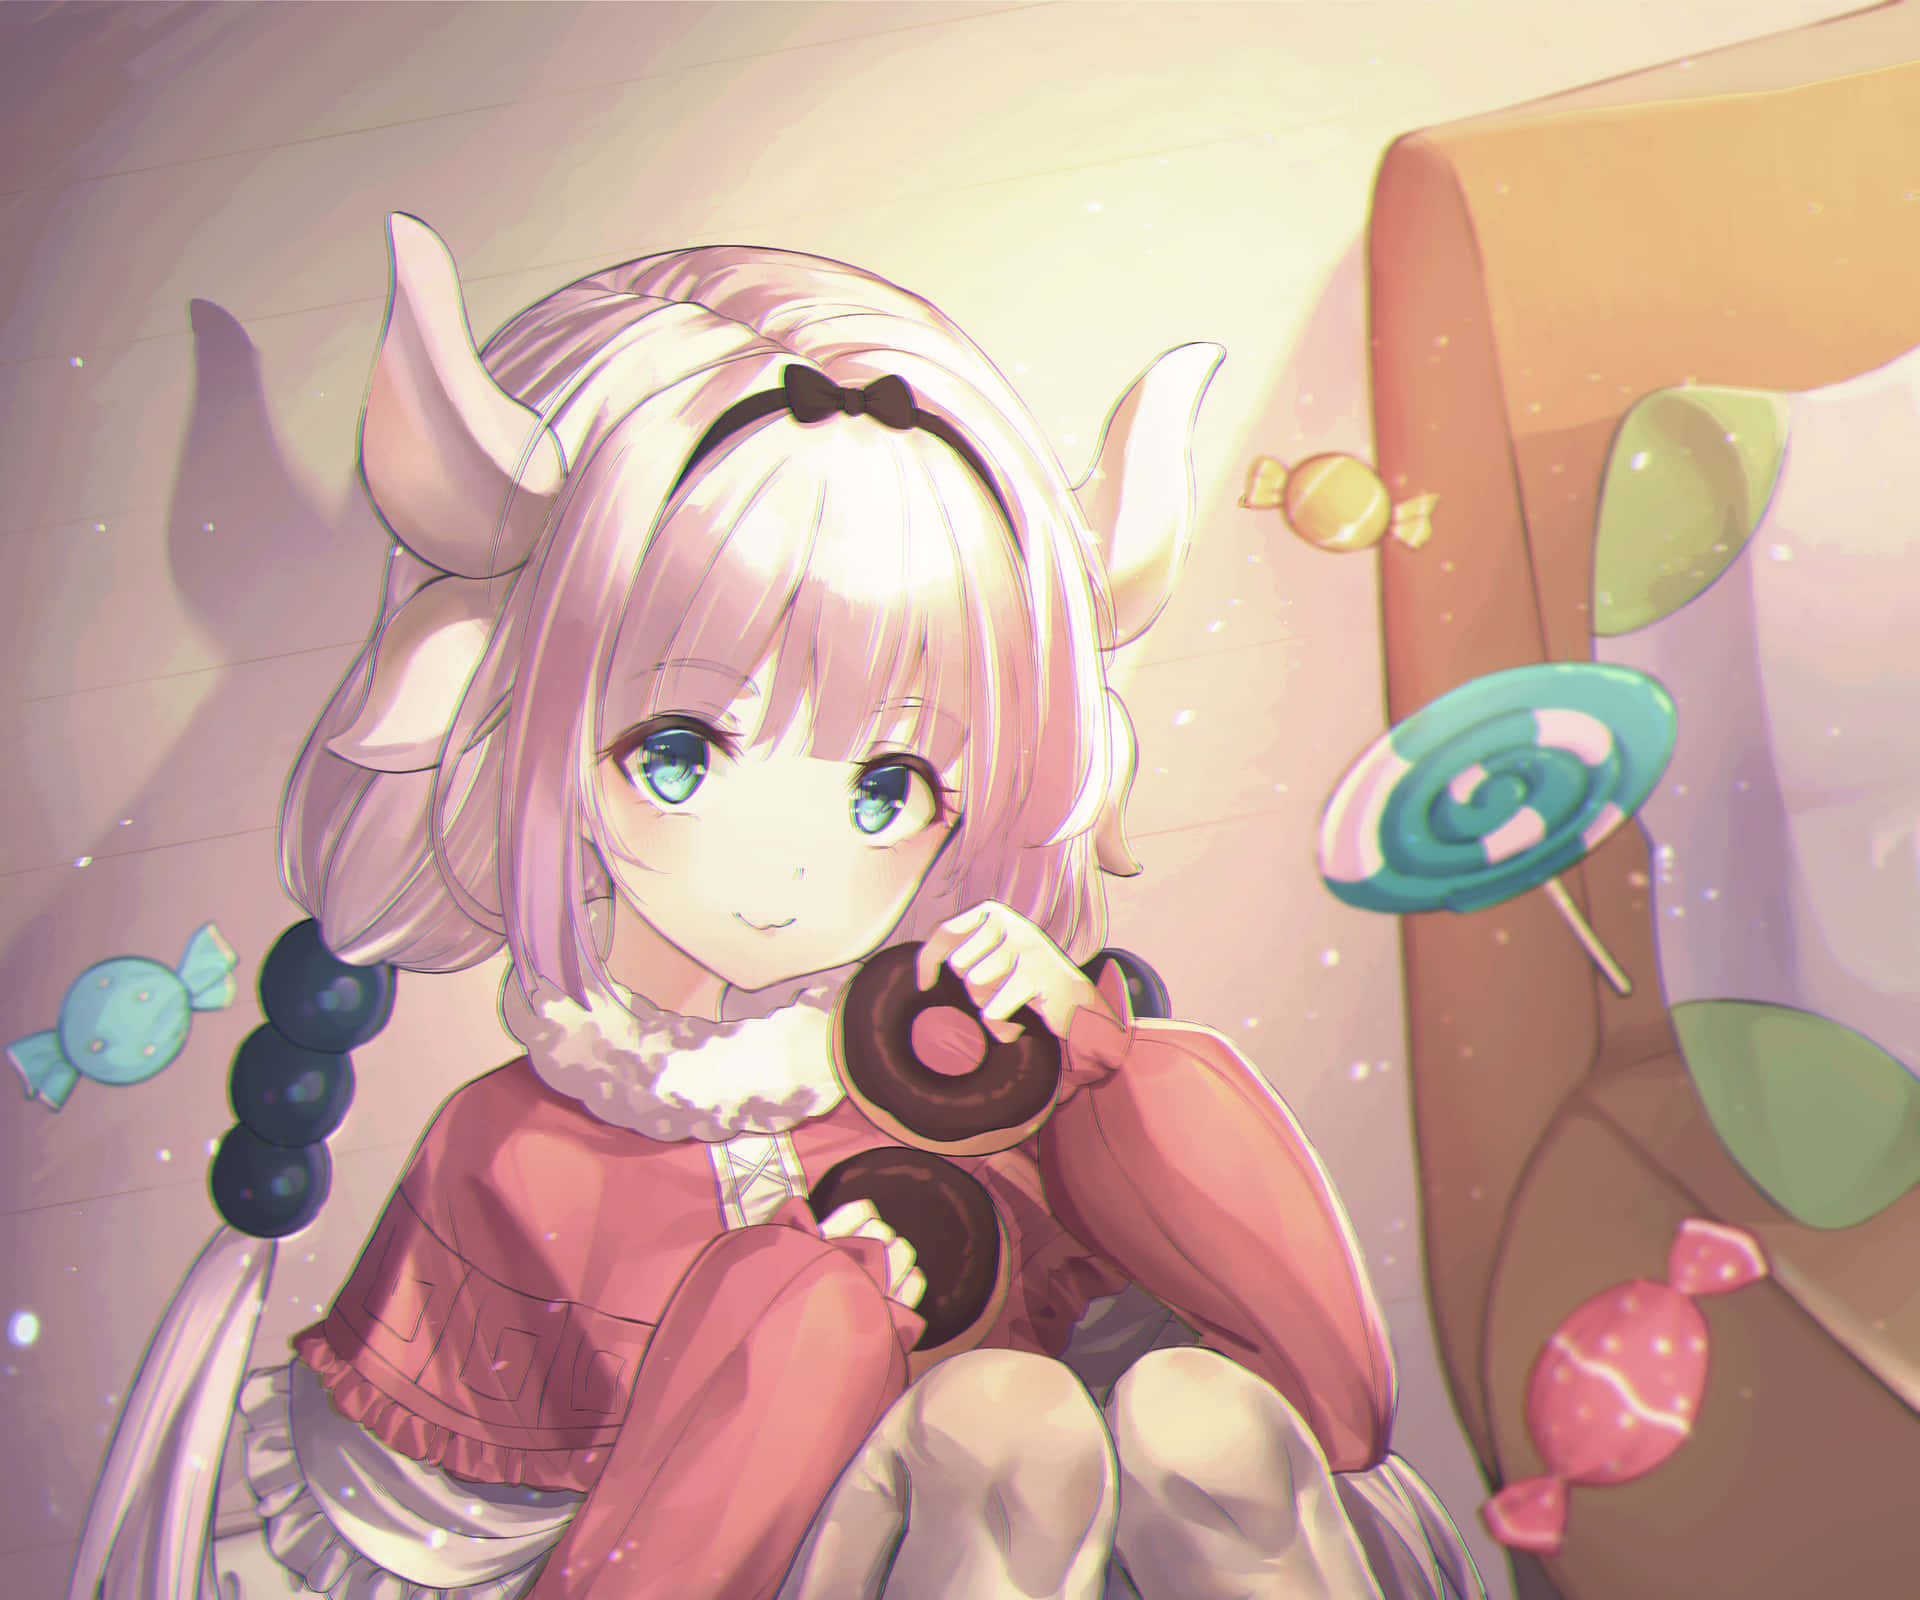 "Welcome to the Fun and Colorful World of Kanna Kamui!" Wallpaper